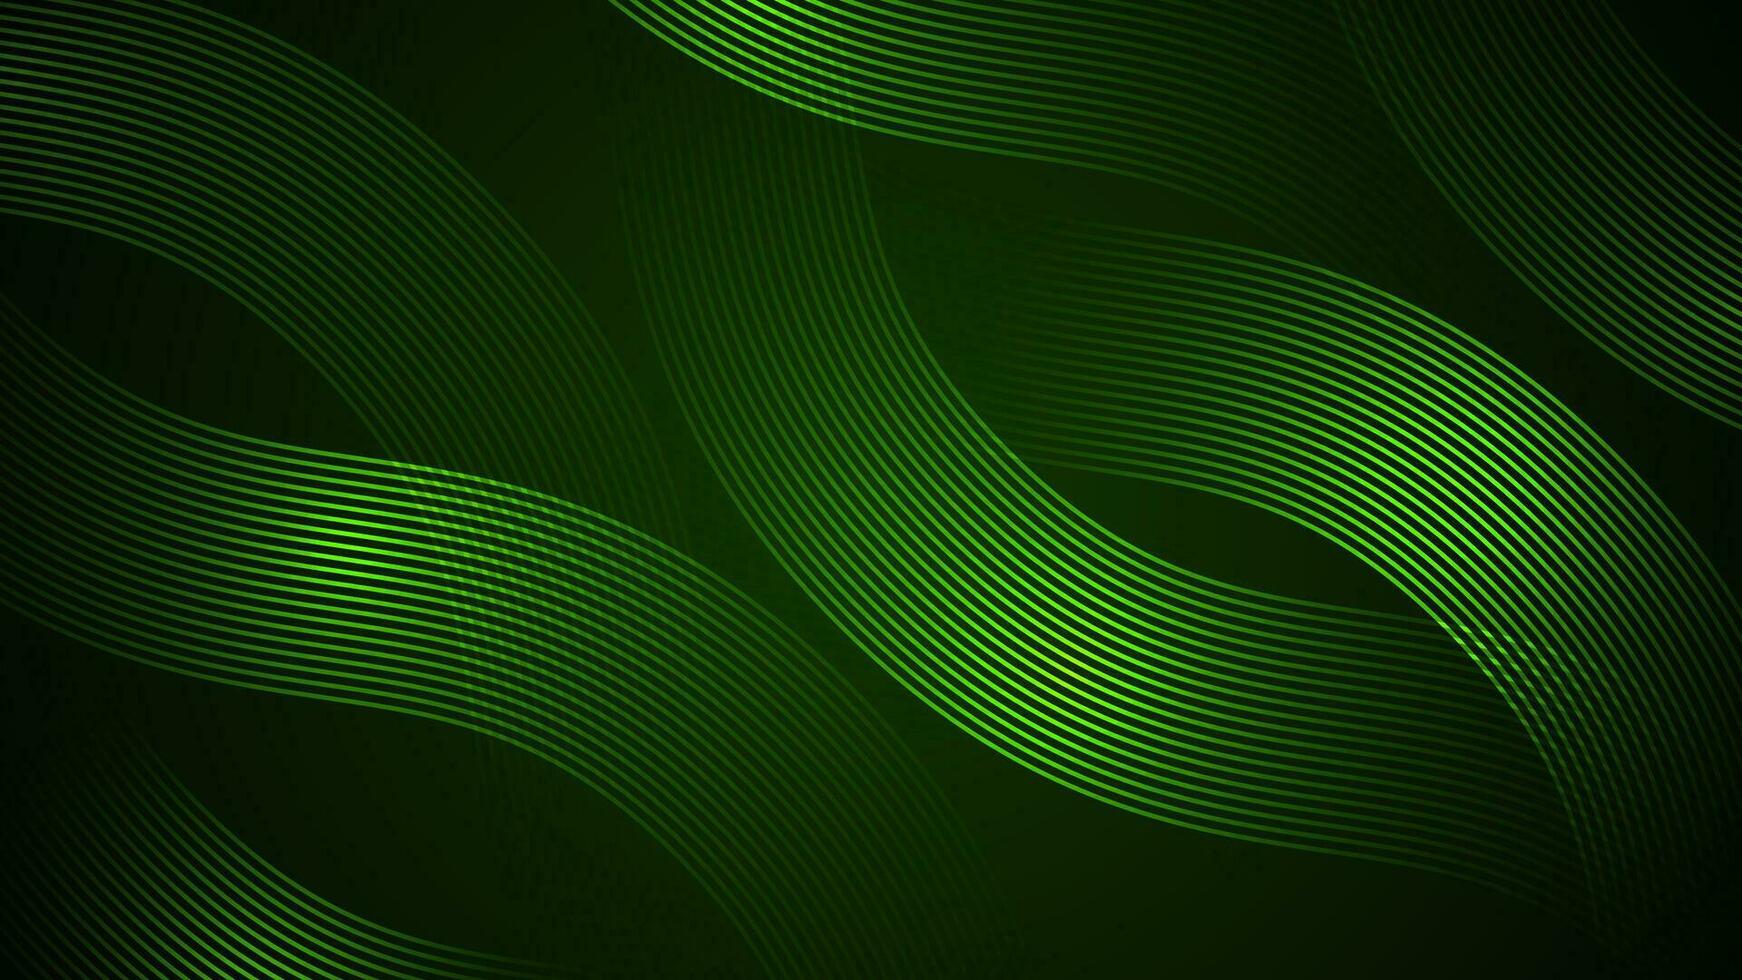 Dark green simple abstract background with wave style lines as the main element. vector